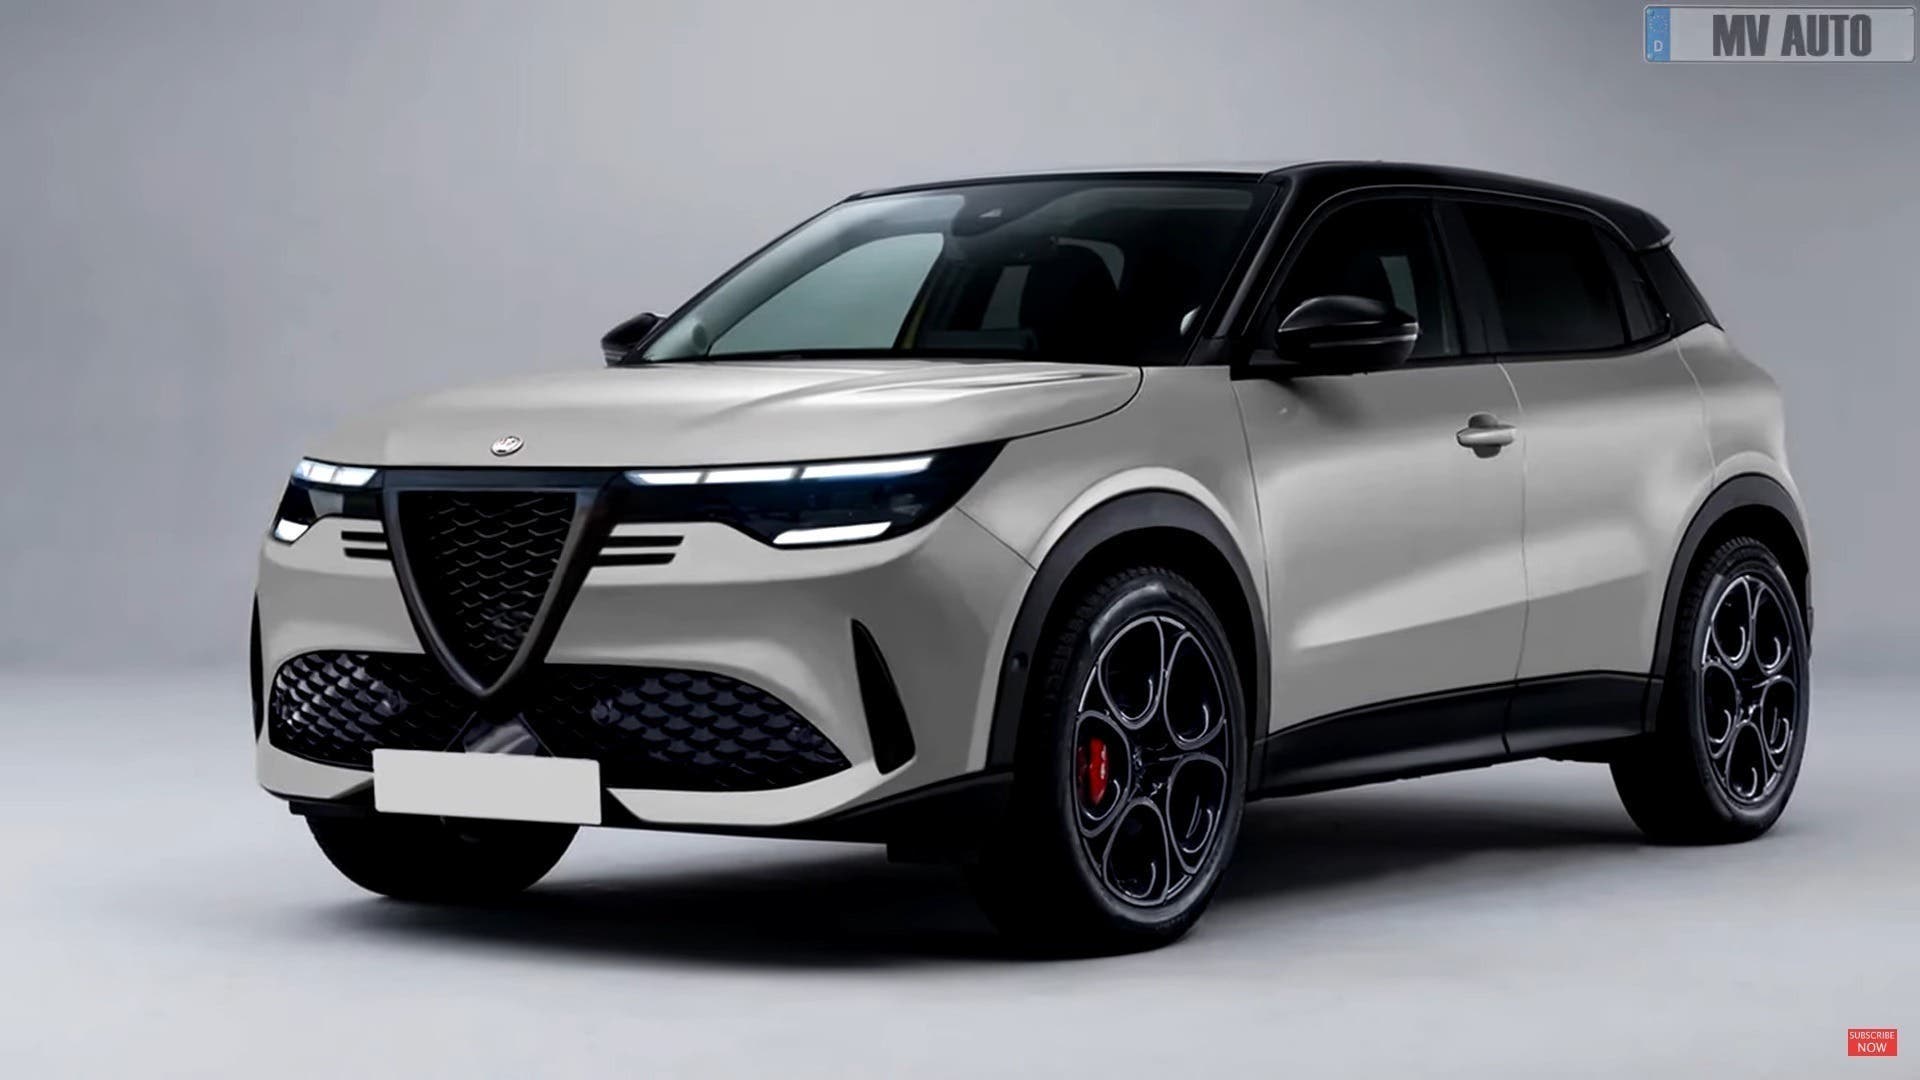 Alfa Romeo Milano Debuts In April, Here's What We Know About The